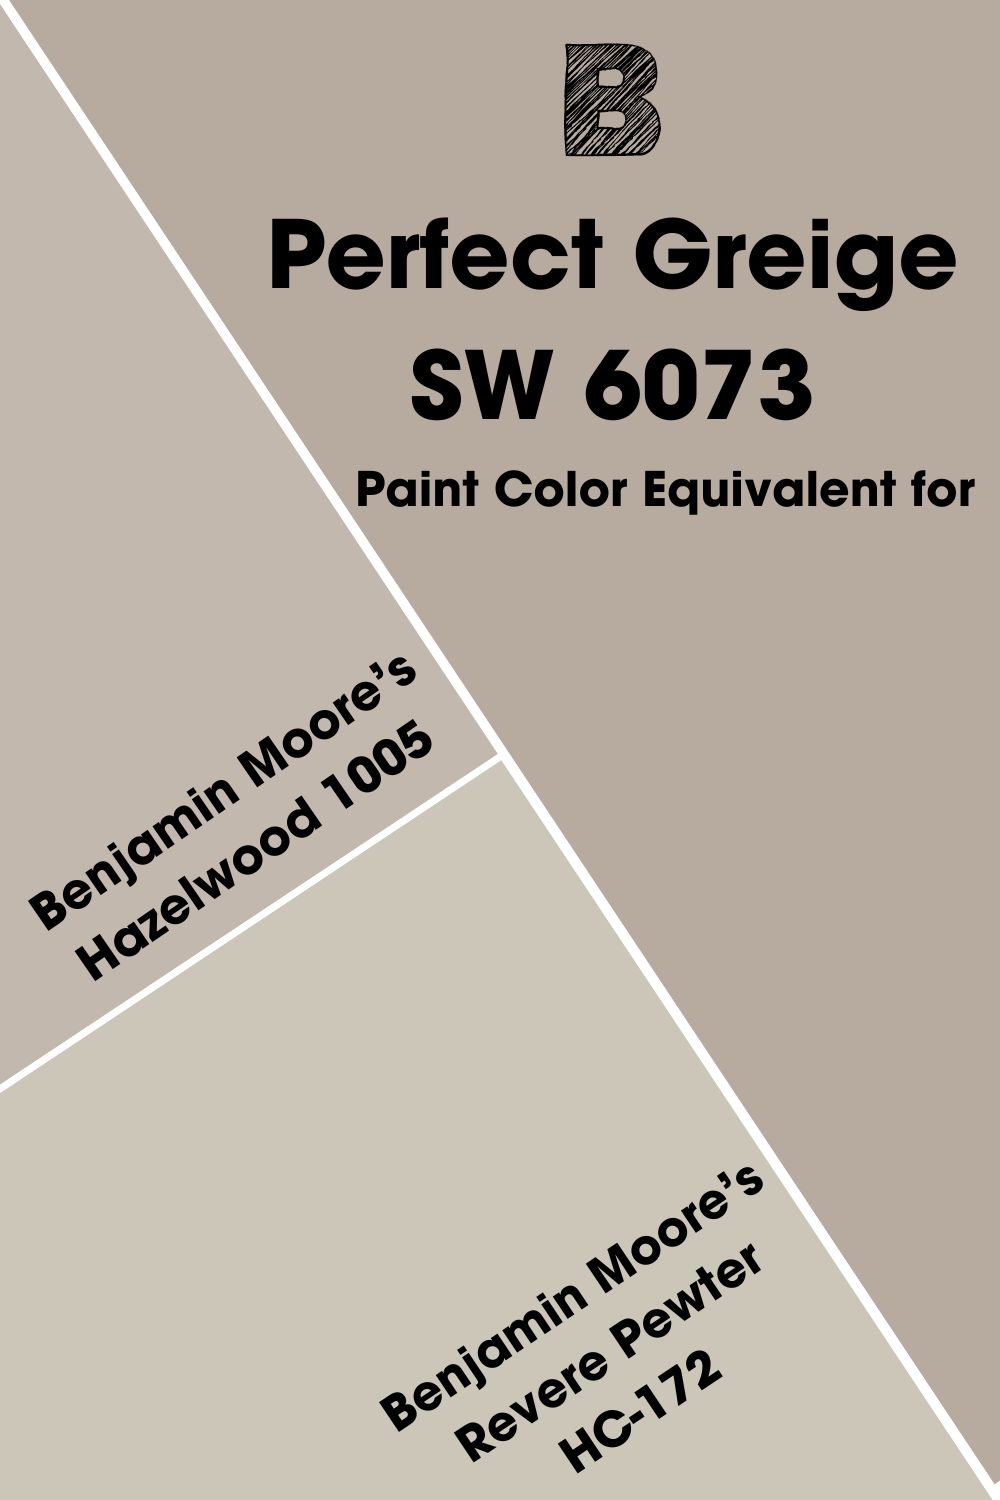 Paint Color Equivalent for